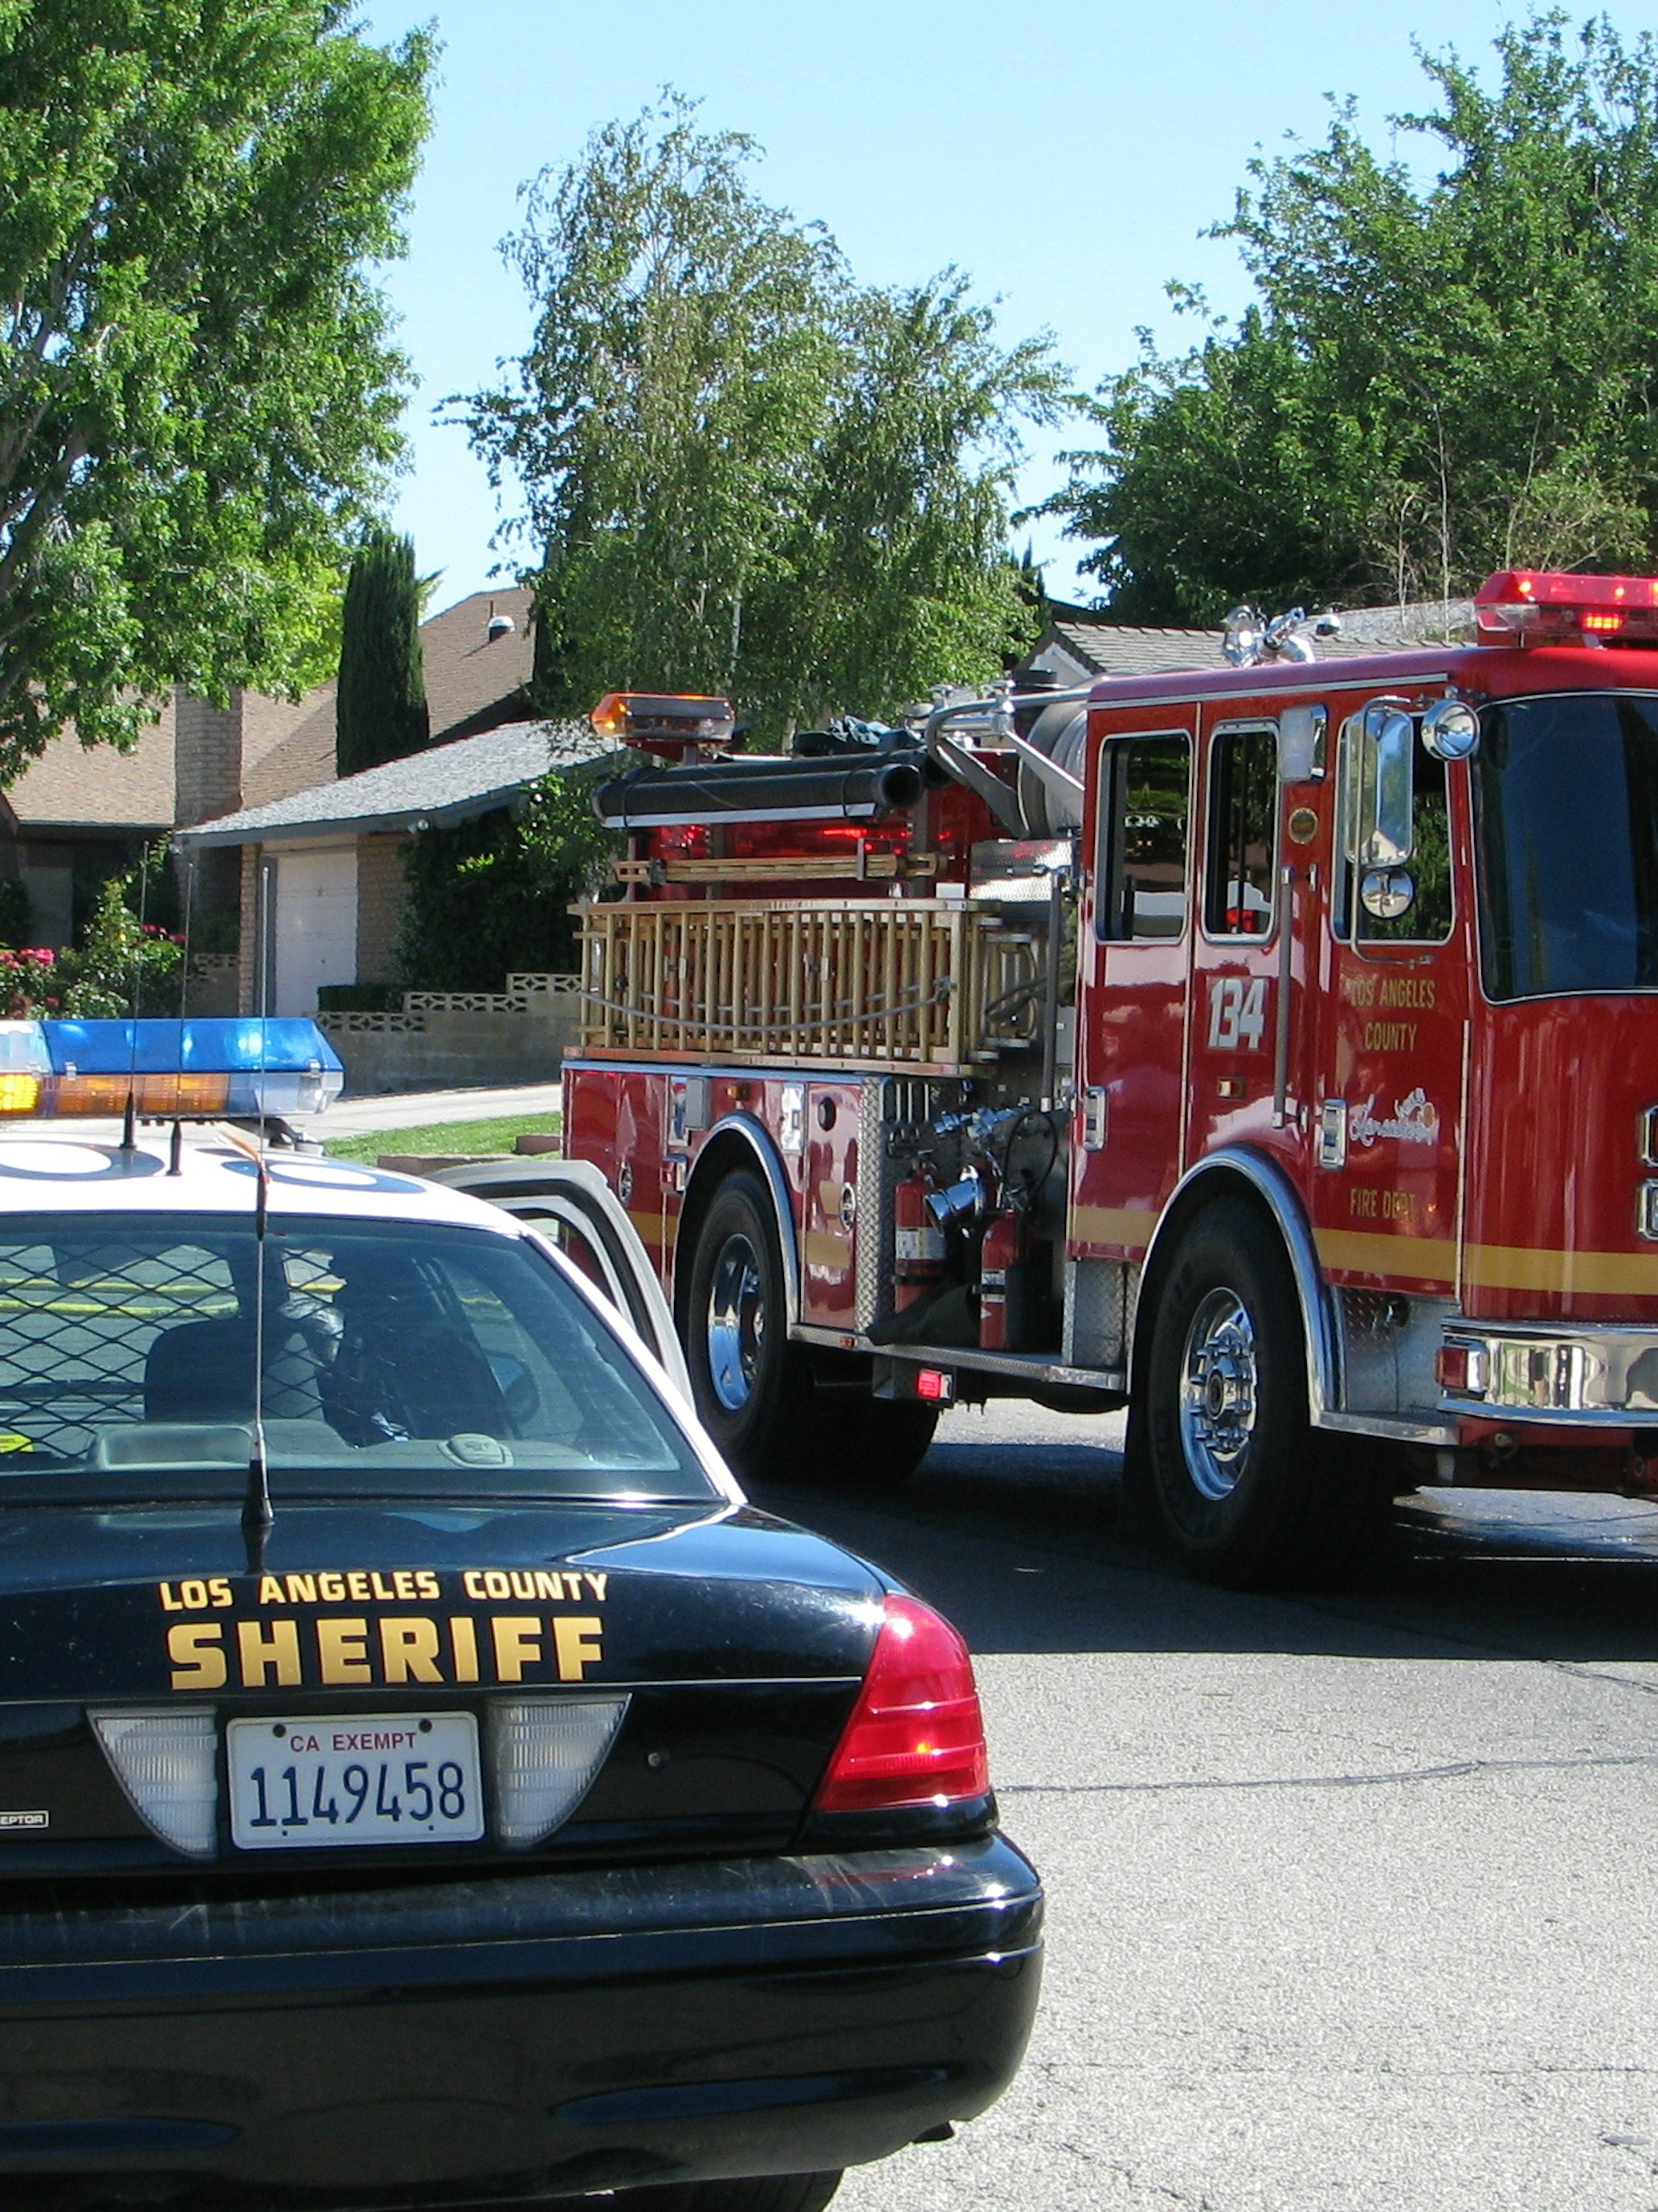 Why Do Most Police, Fire, and Ambulance Sirens Sound the Same? | Inverse